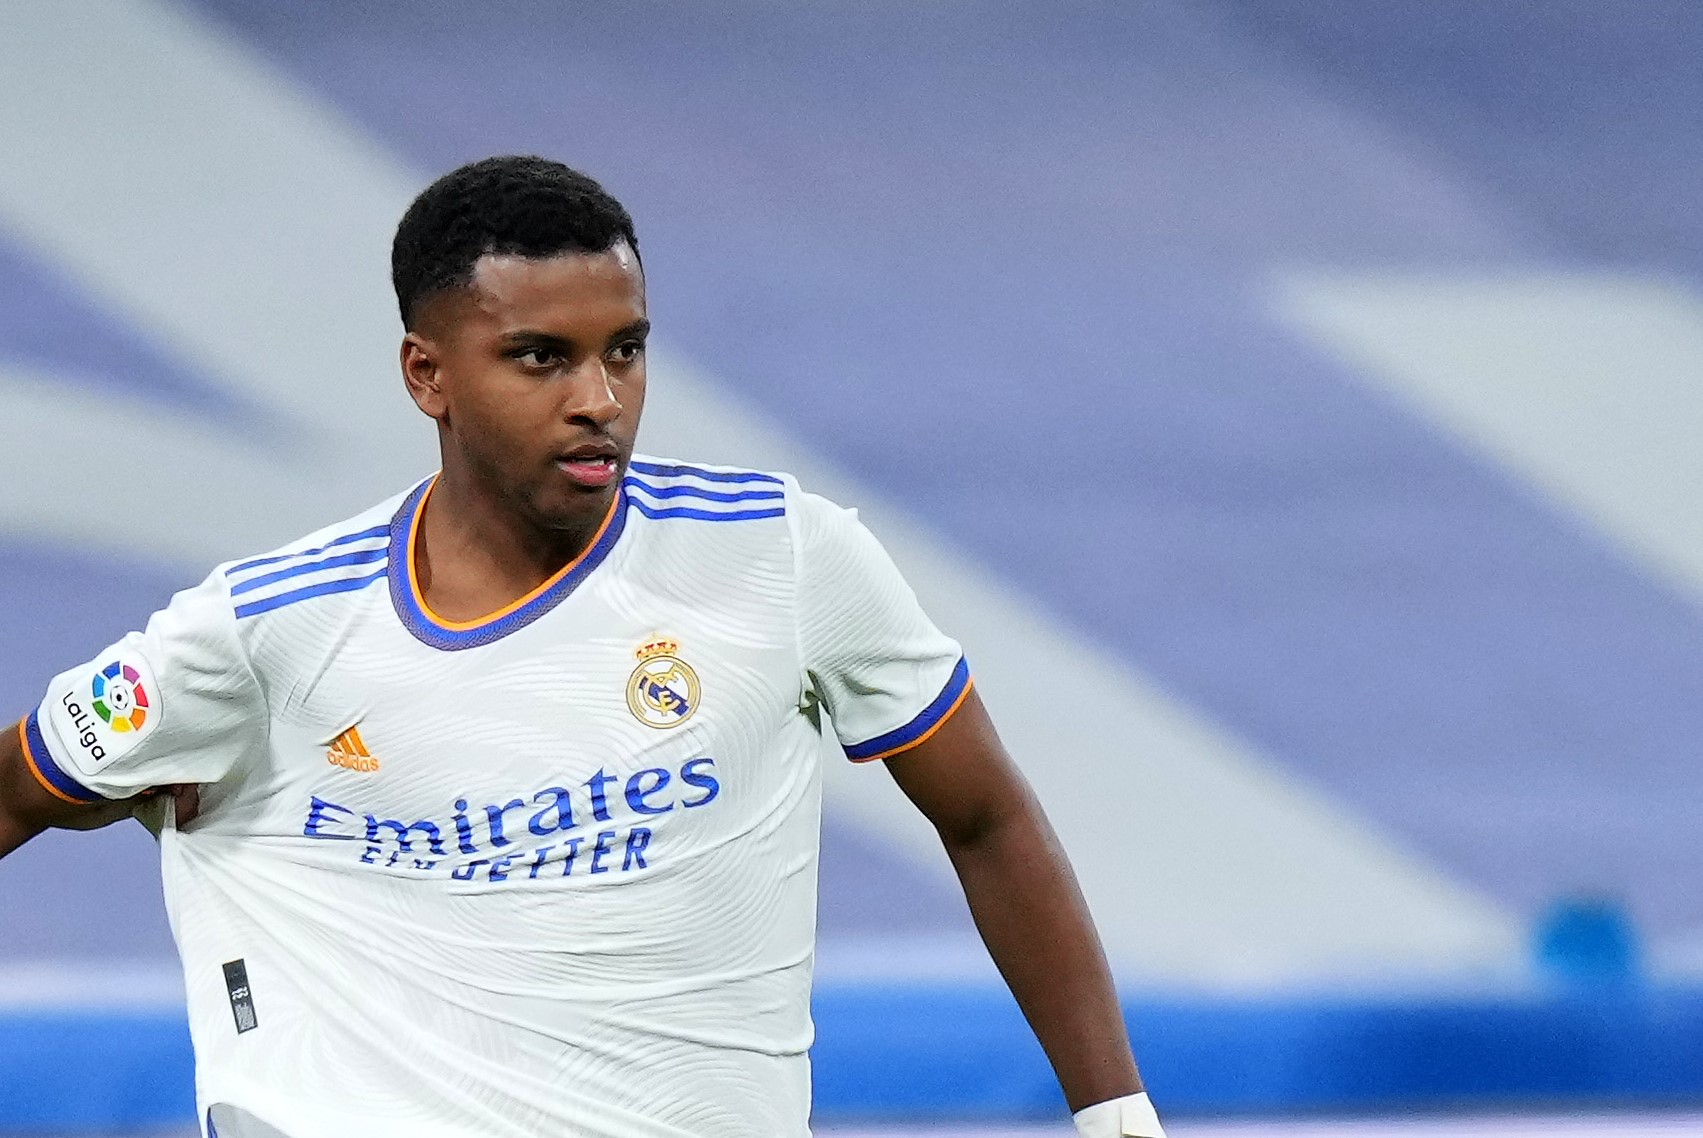 Real Madrid confirm squad list to face Rayo Vallecano as Rodrygo remains out